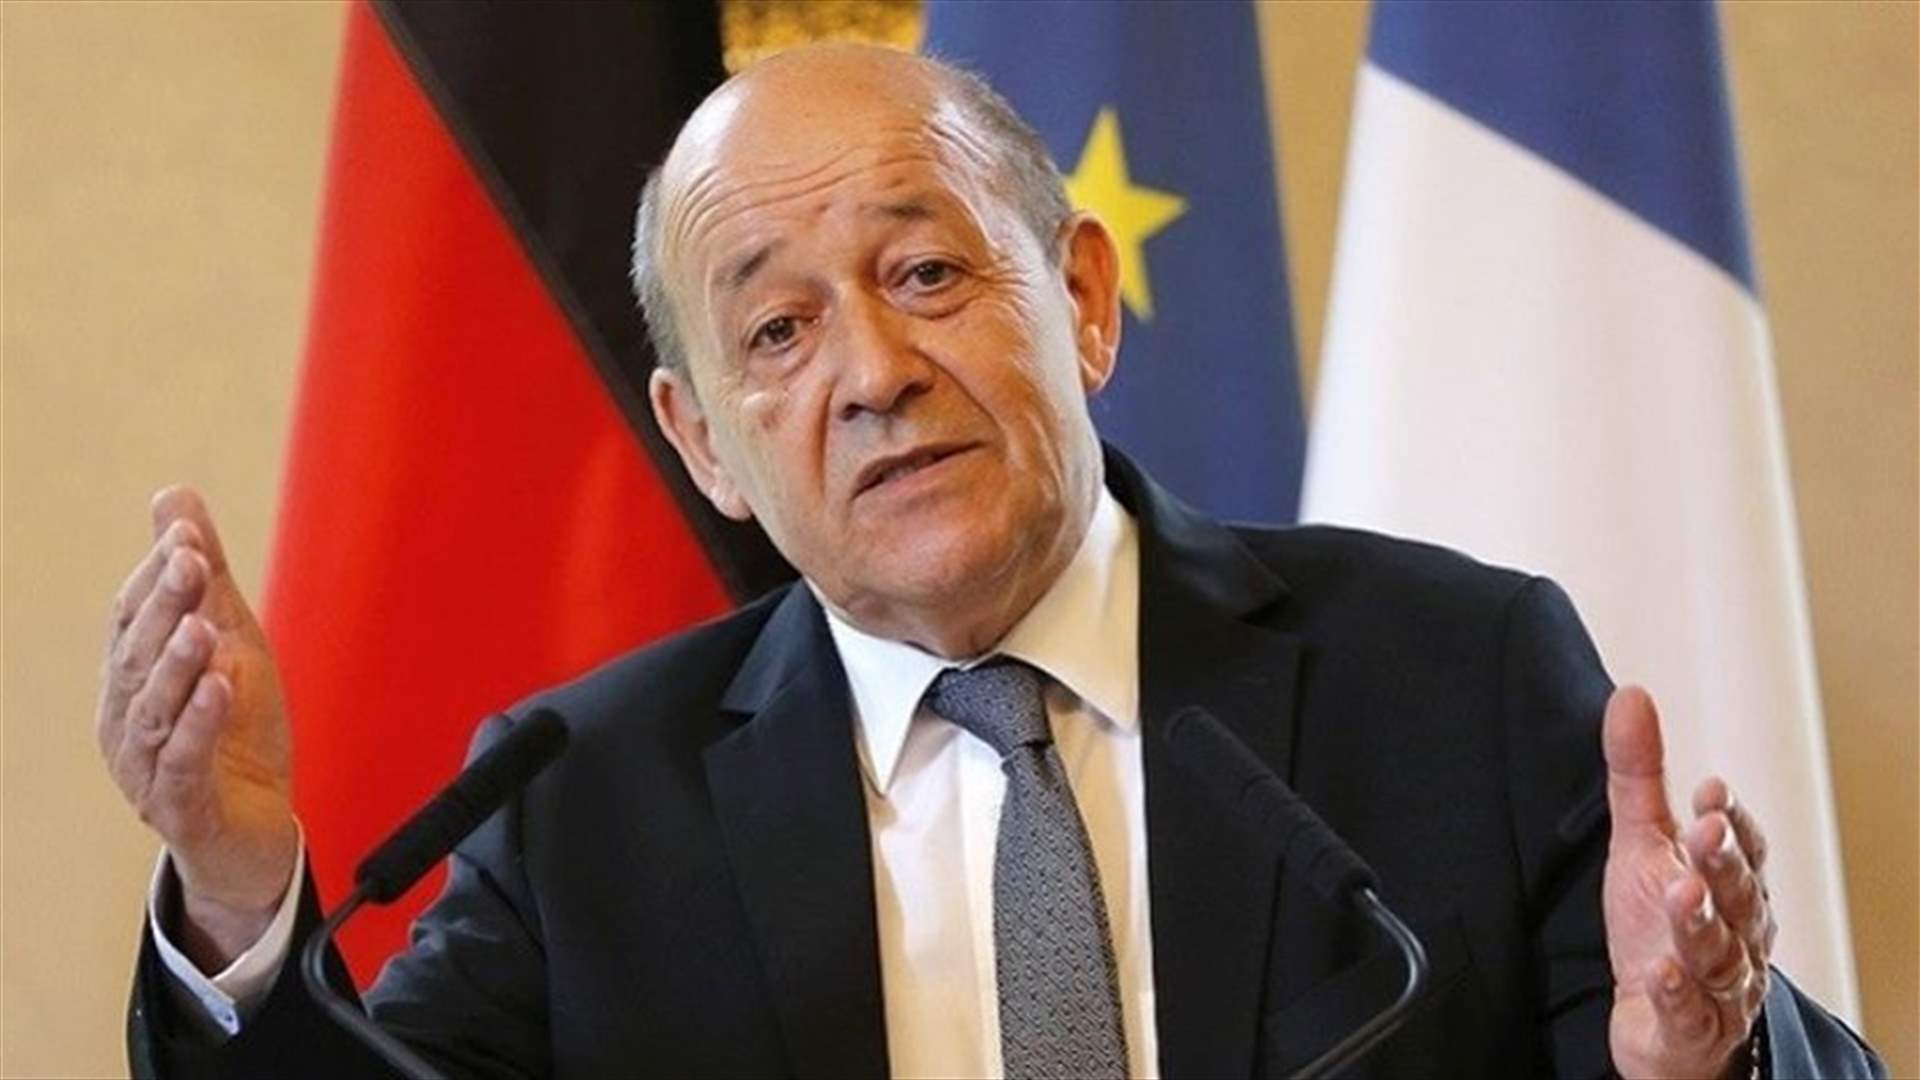 Le Drian says authorities in Lebanon must take action to end the crisis